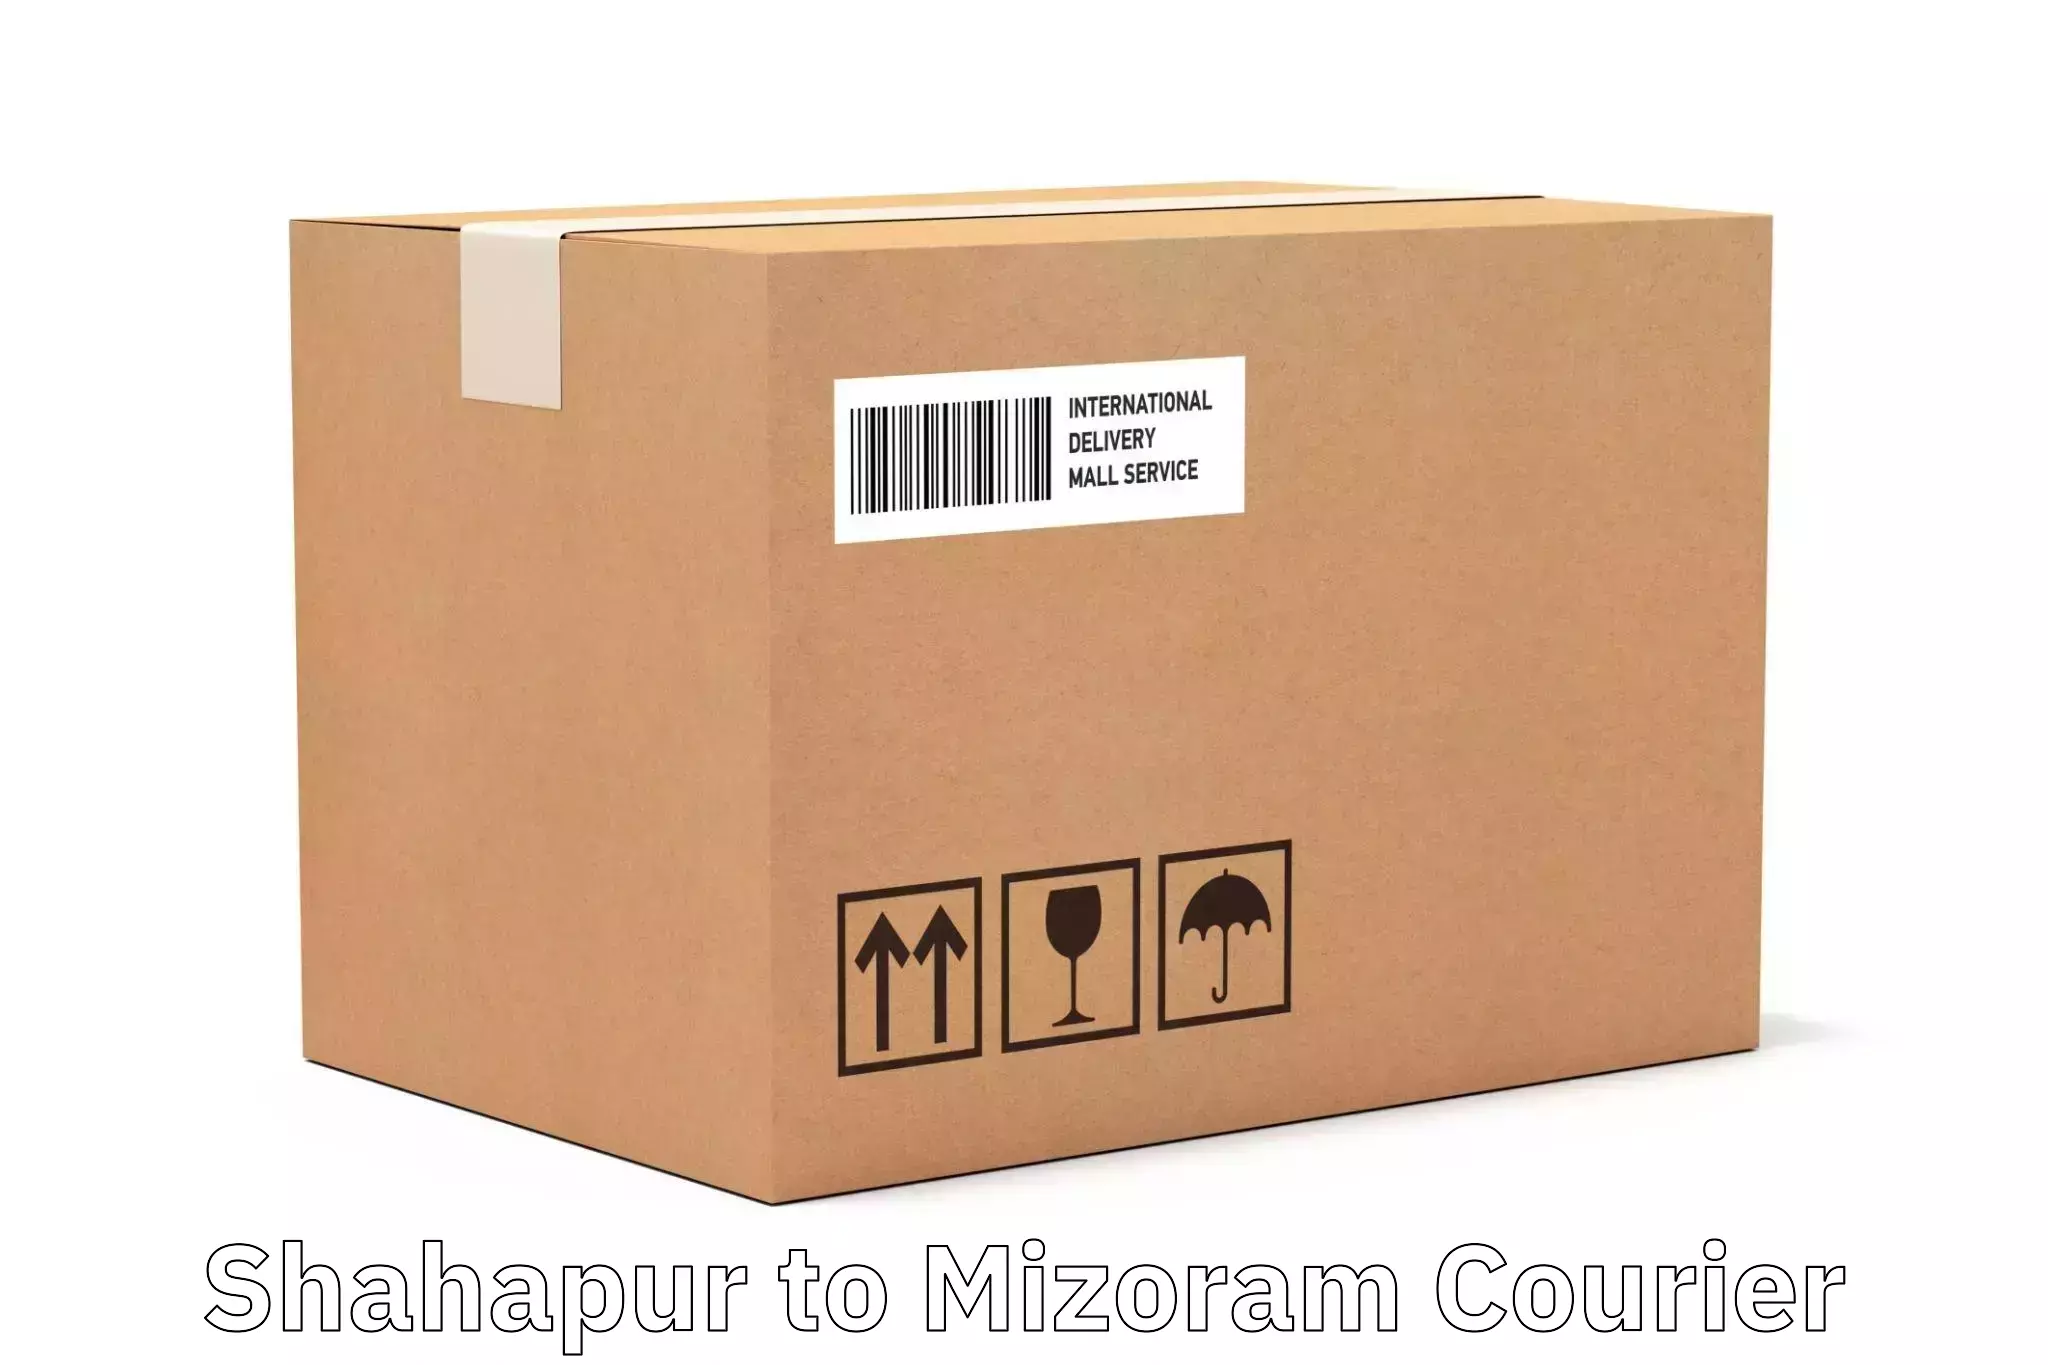 State-of-the-art courier technology Shahapur to Darlawn